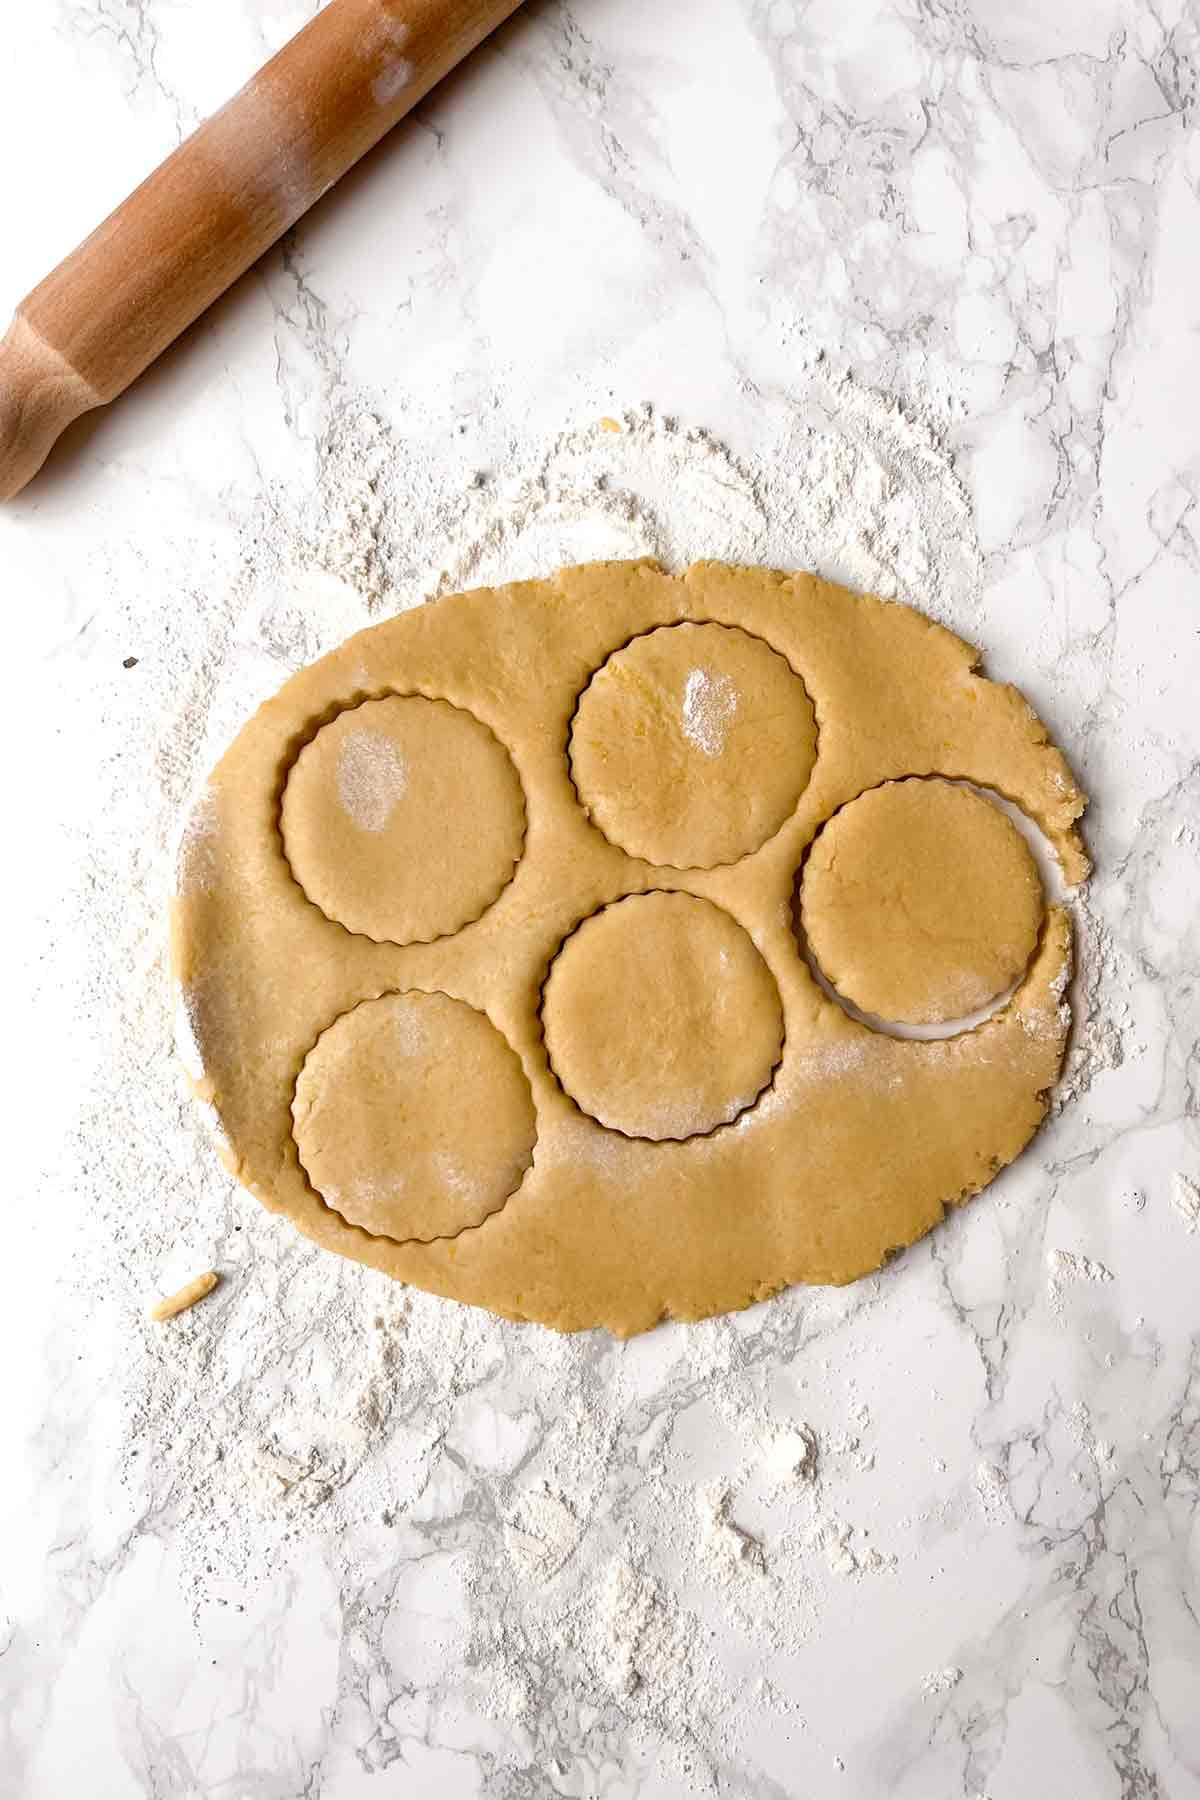 Cutting Circles Out Of The Dough